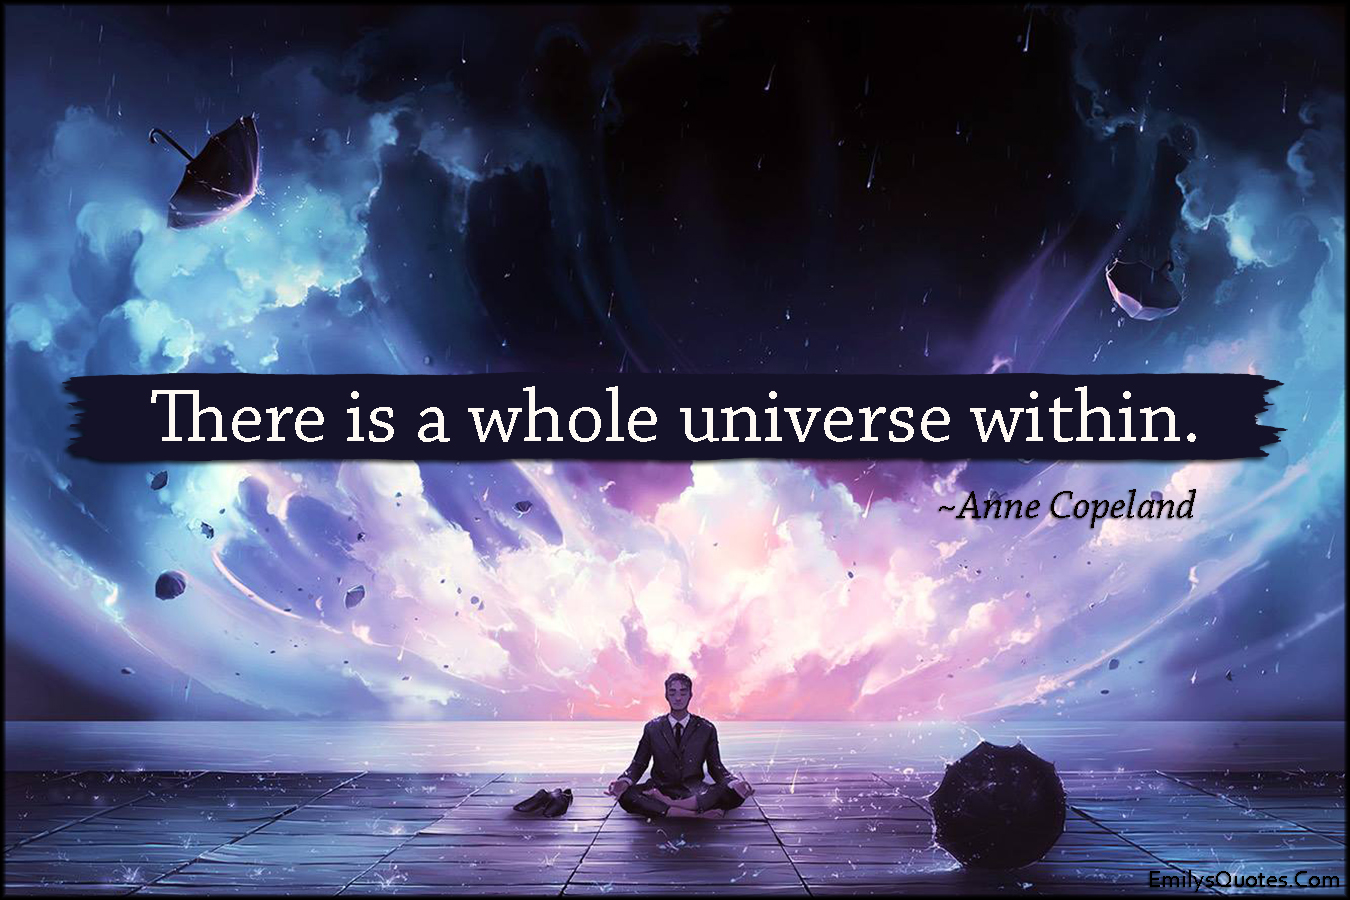 There is a whole universe within